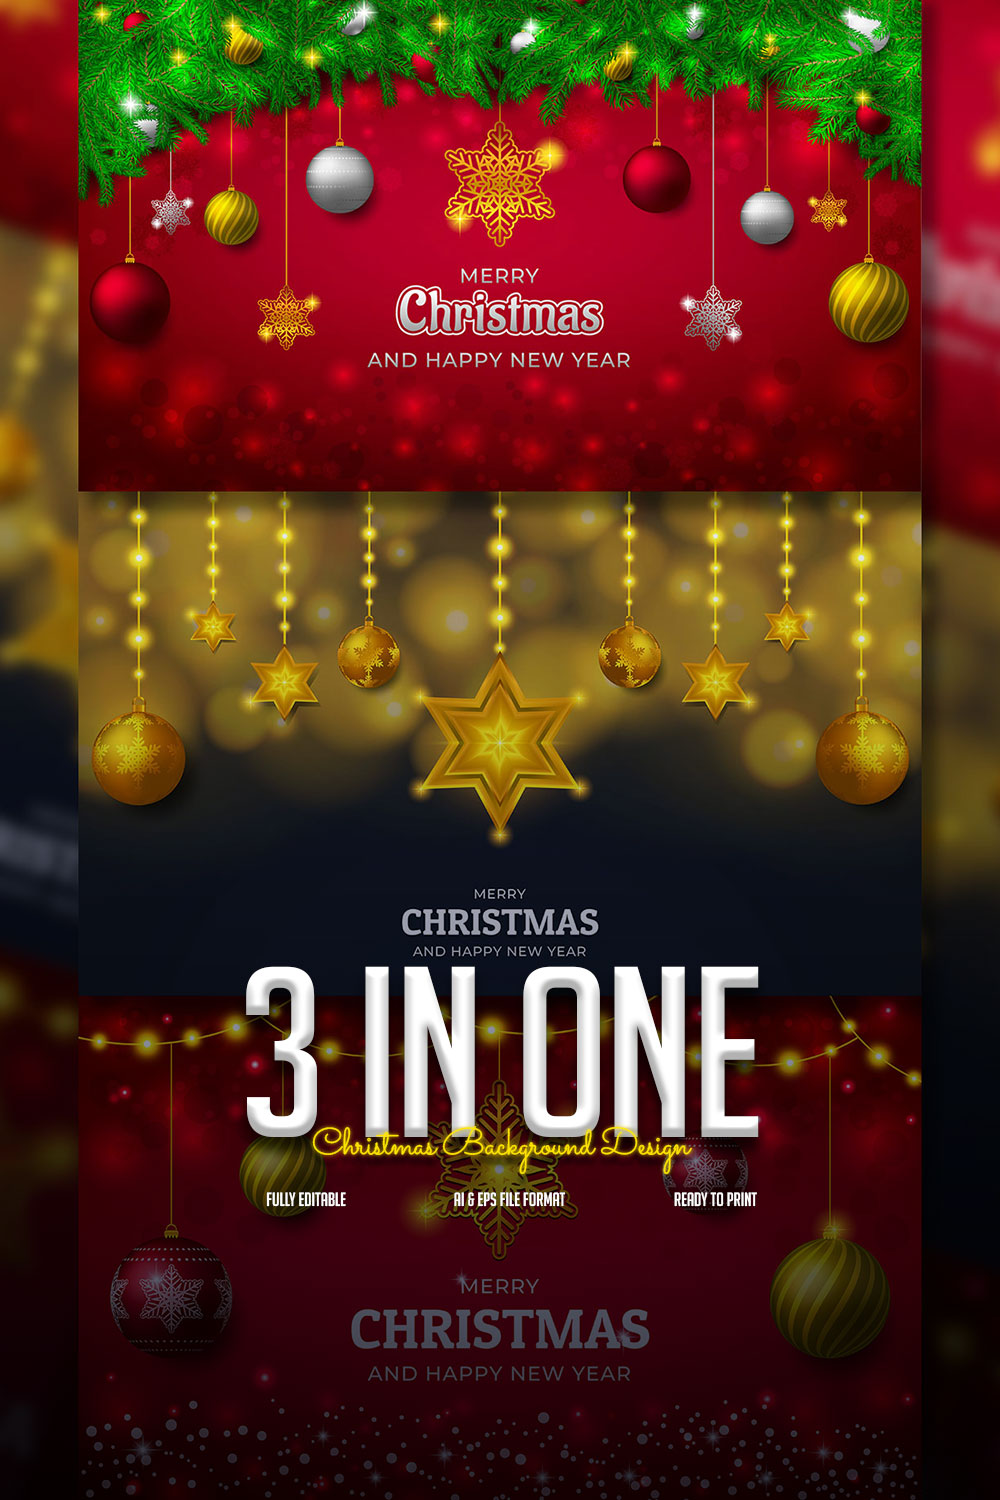 3 In One Christmas Background Design Only In $3 pinterest image.